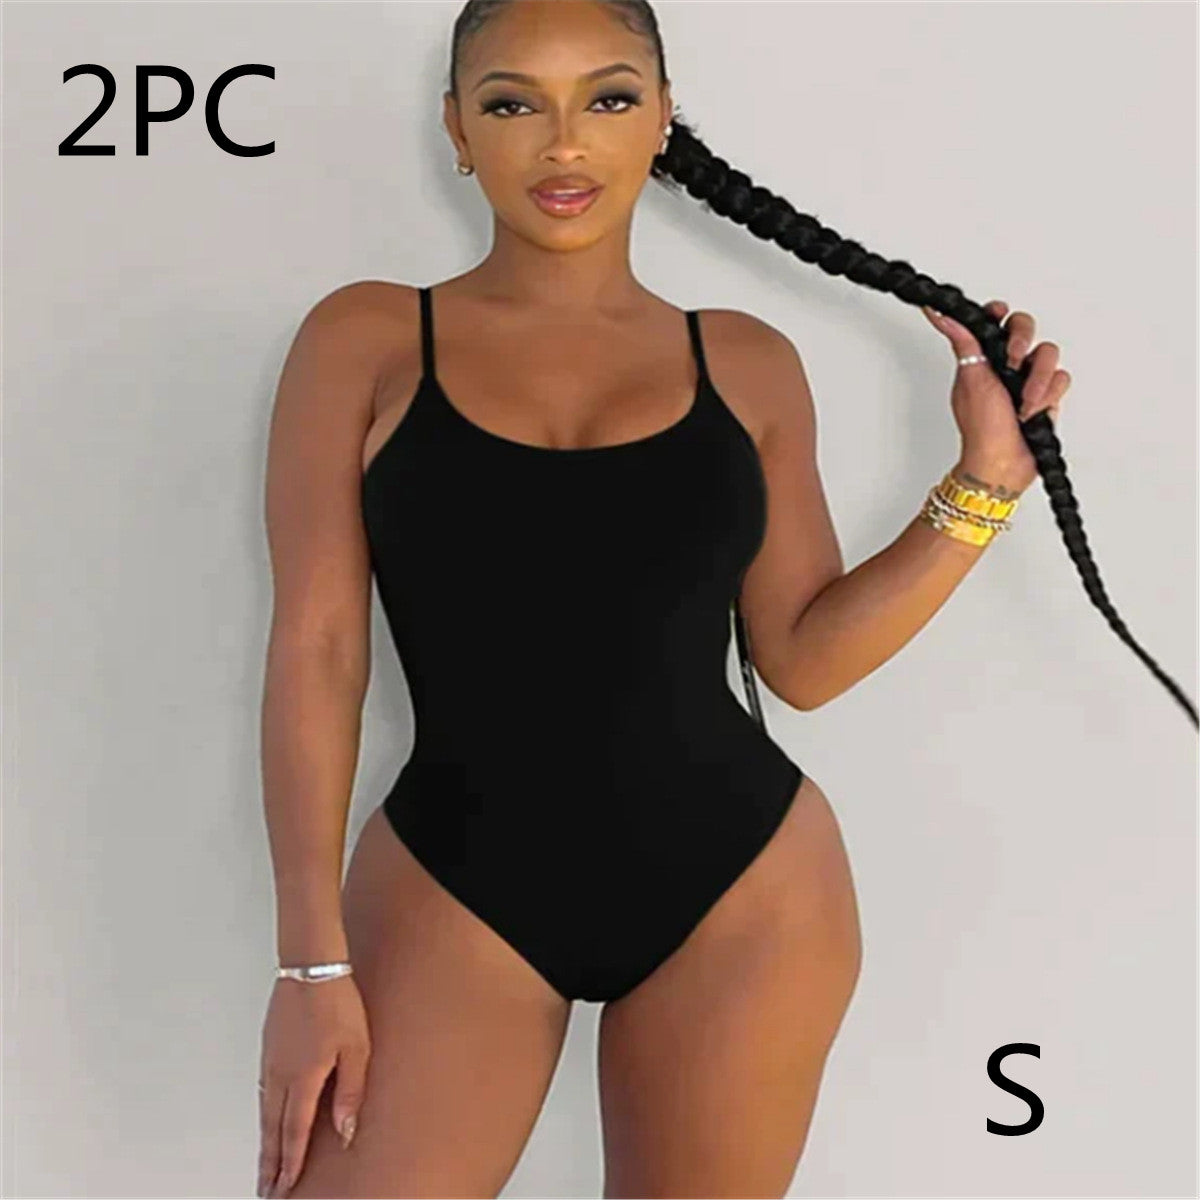 Swimsuit  | Sling Backless Plus Size Solid Color Triangle One-piece Swimsuit | Black Round Neck 2PC |  S| thecurvestory.myshopify.com